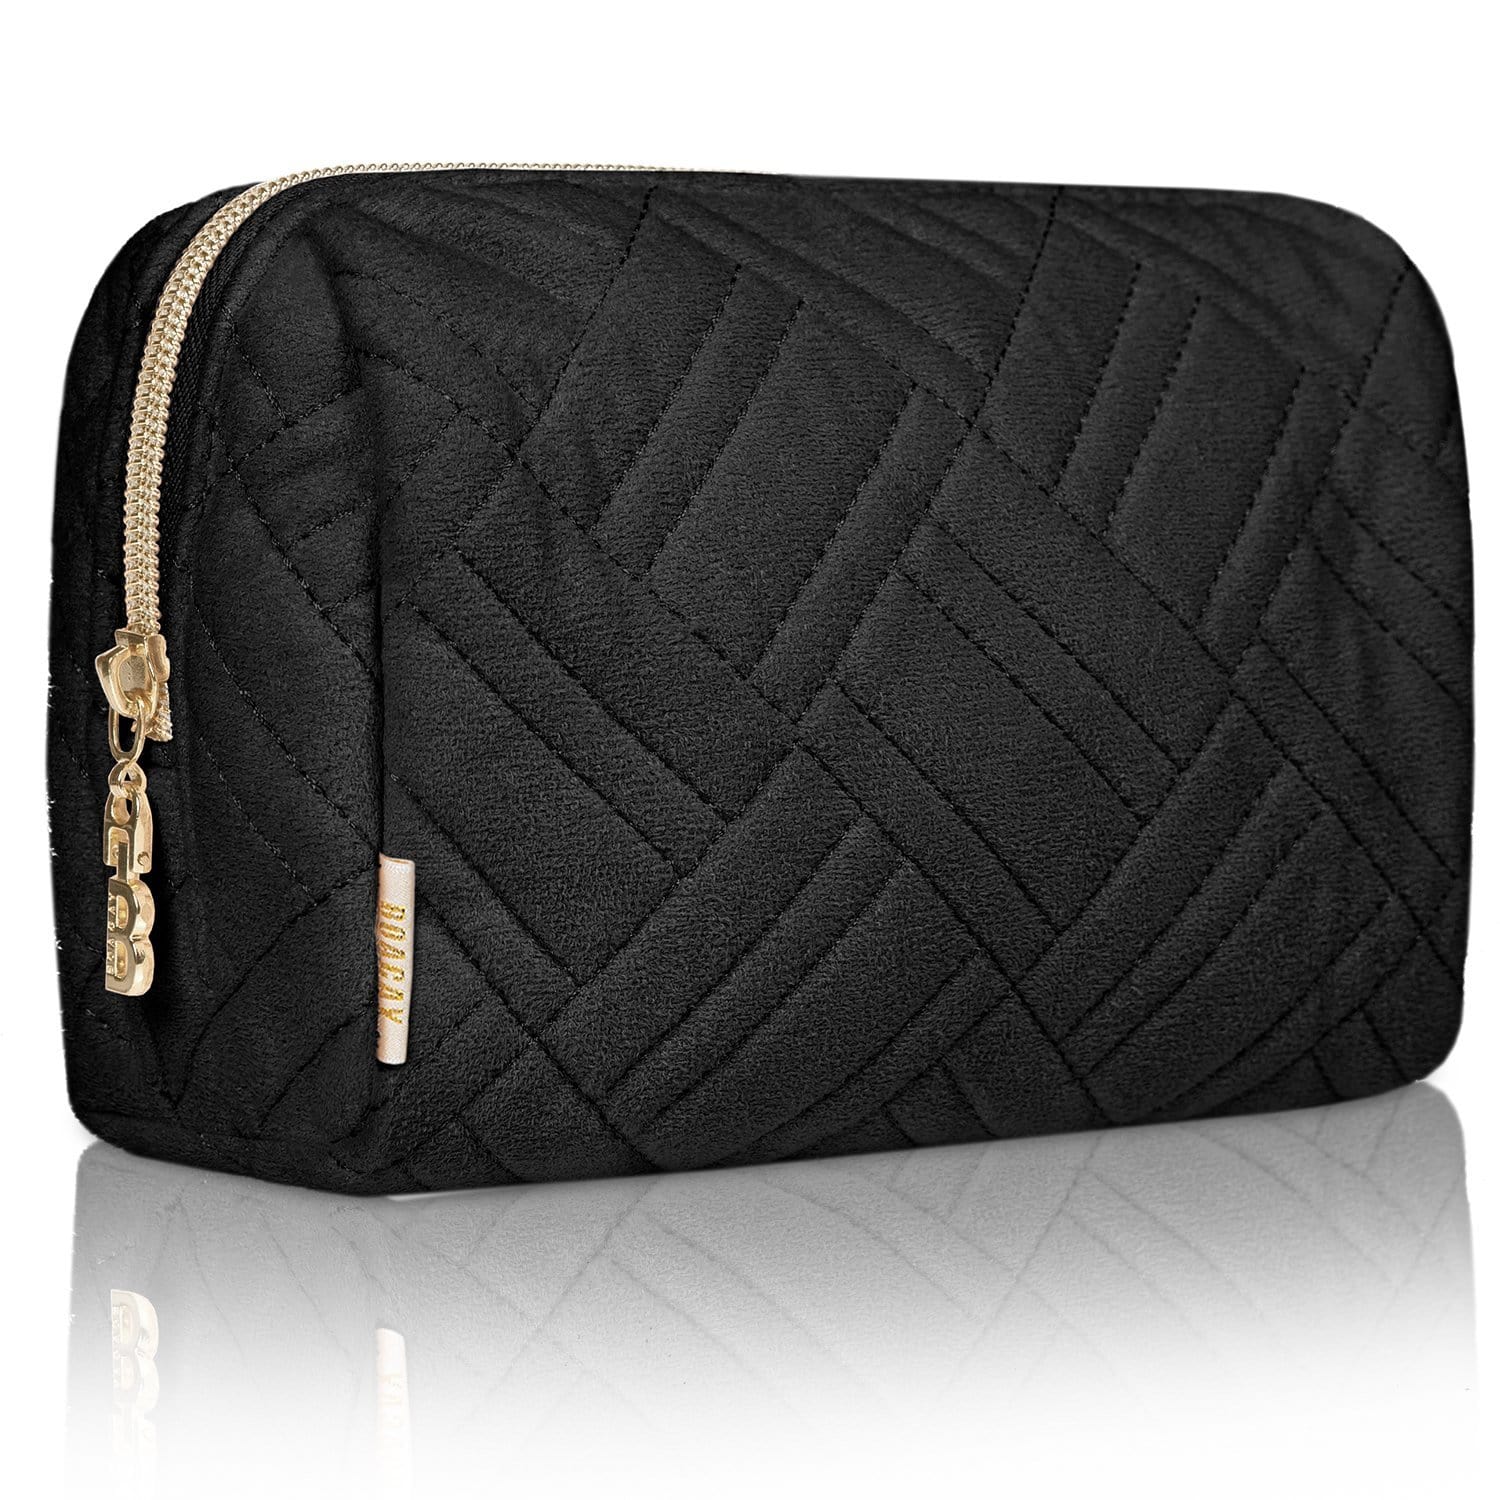 Sara Miller Beauty Bamboo Small Cosmetic Makeup Pouch Bag (Black) :  : Beauty